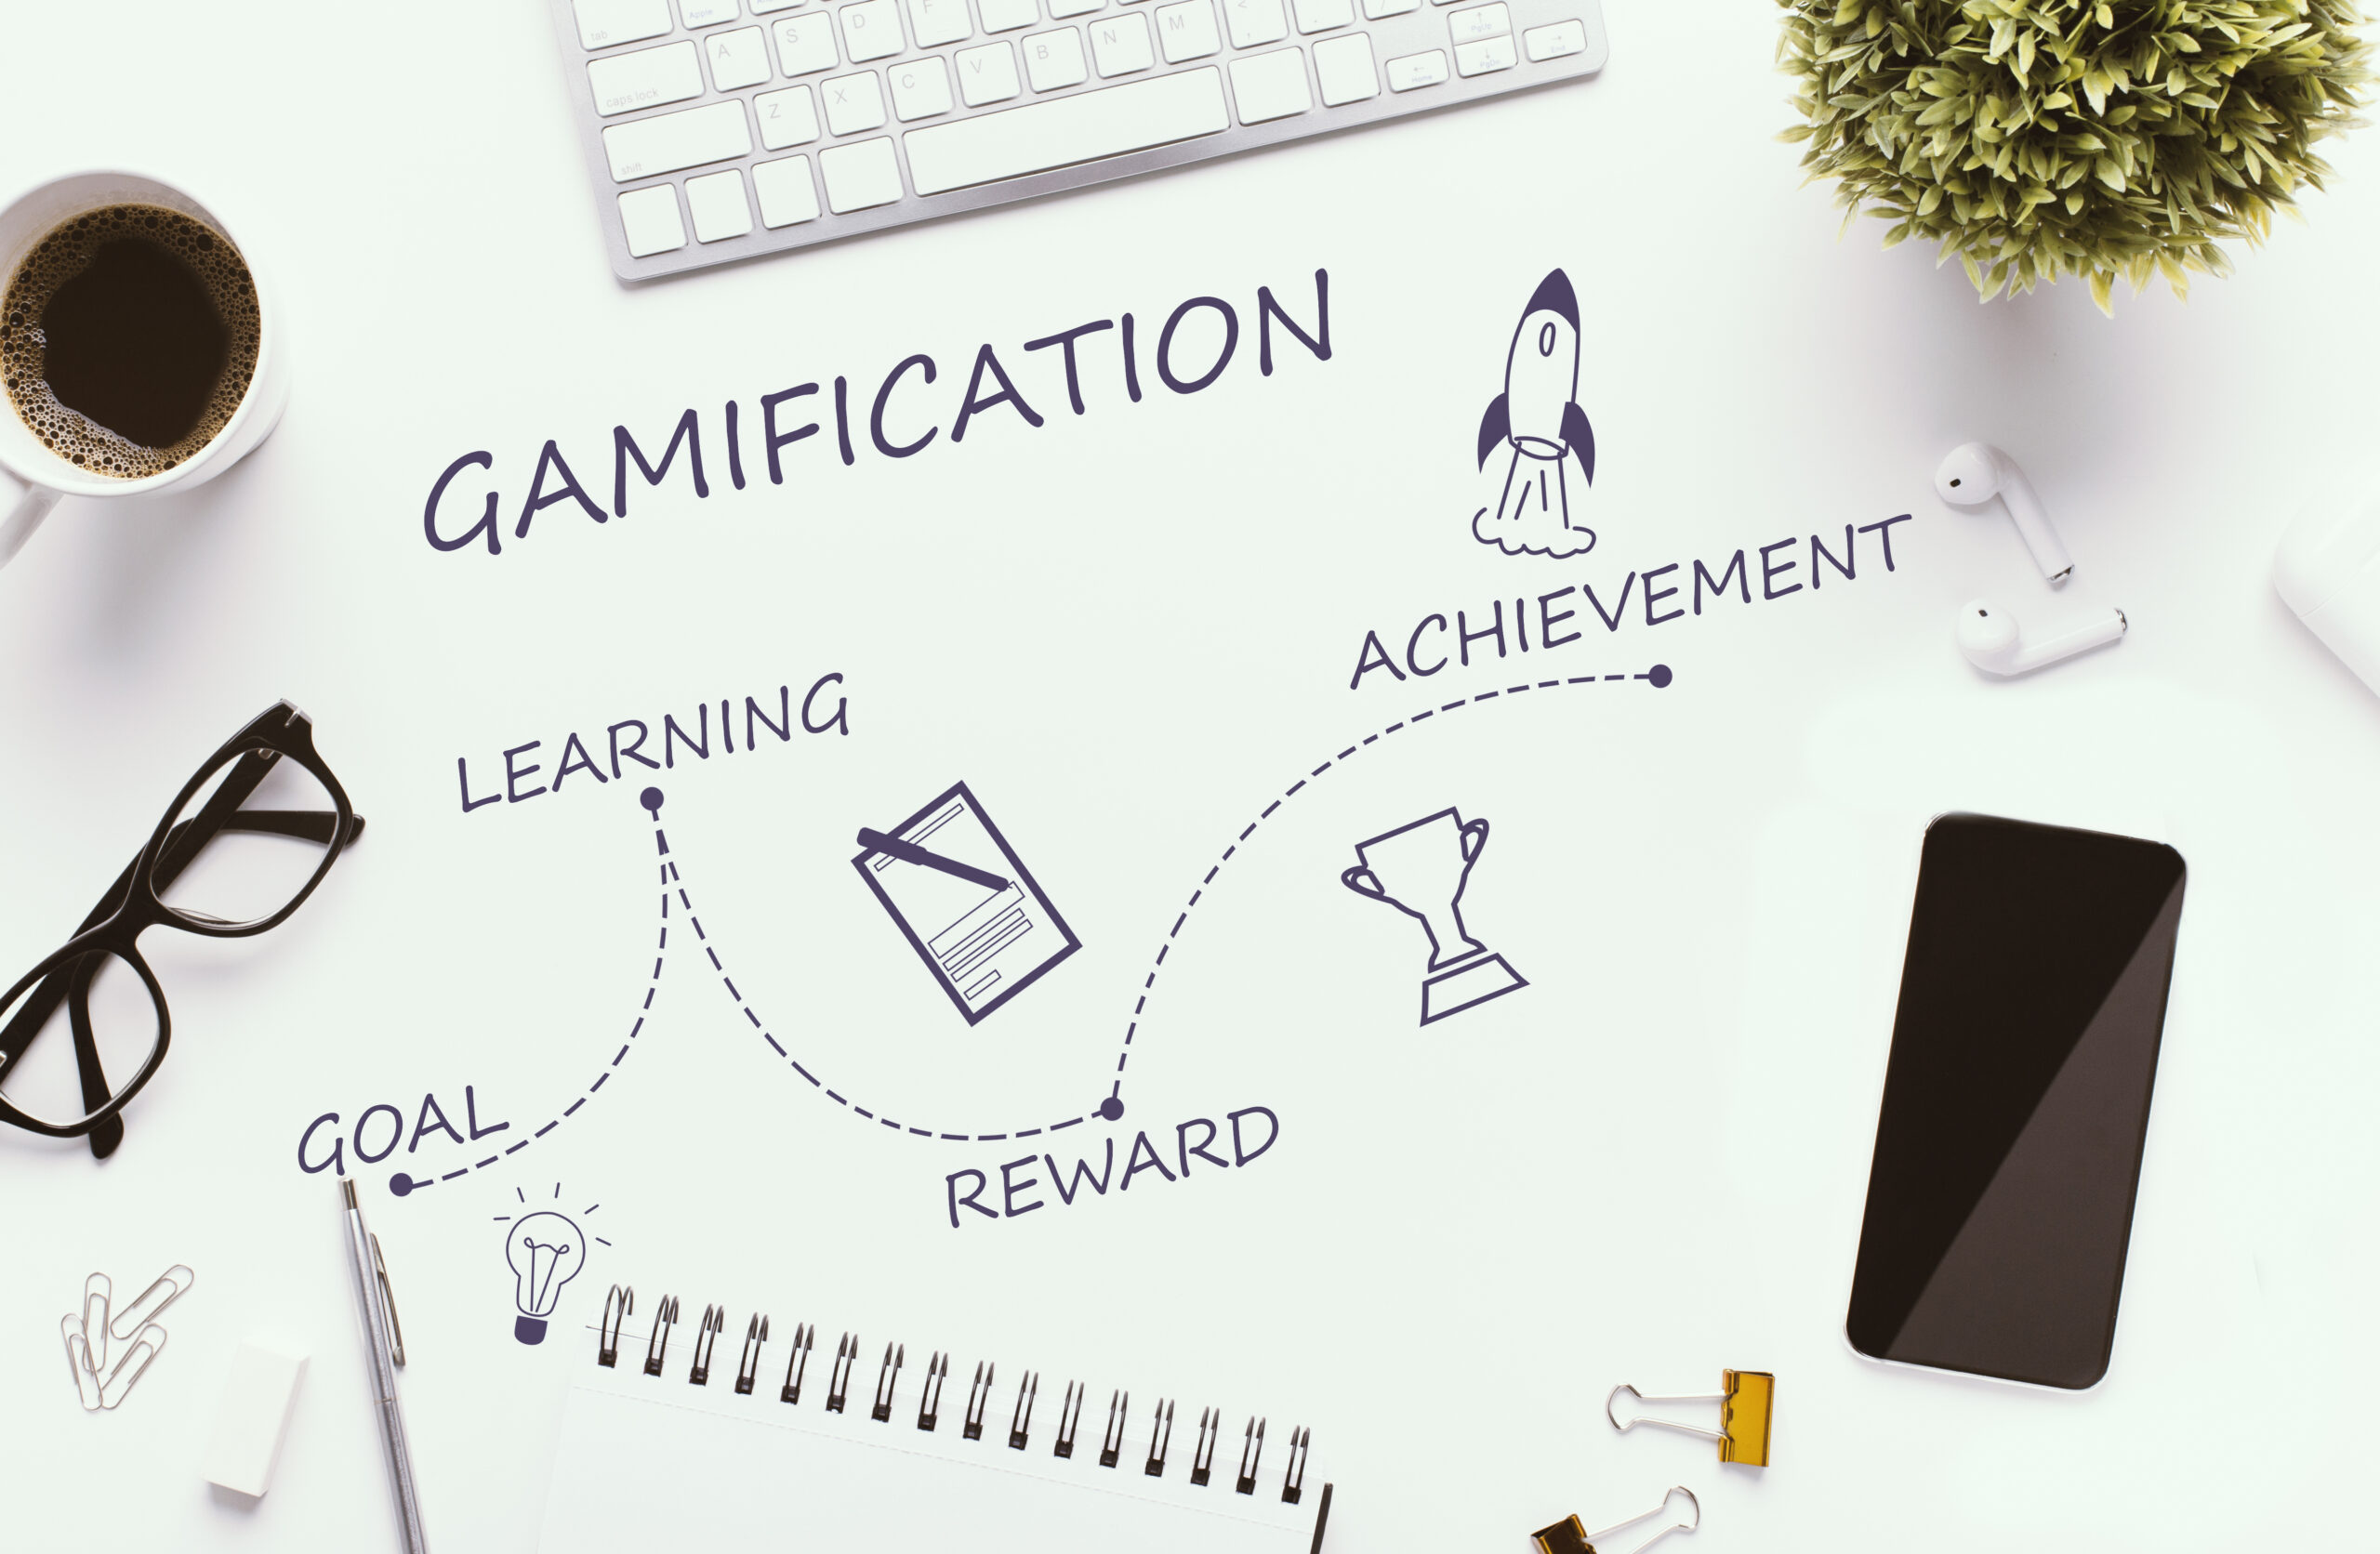 The positive side of gamification